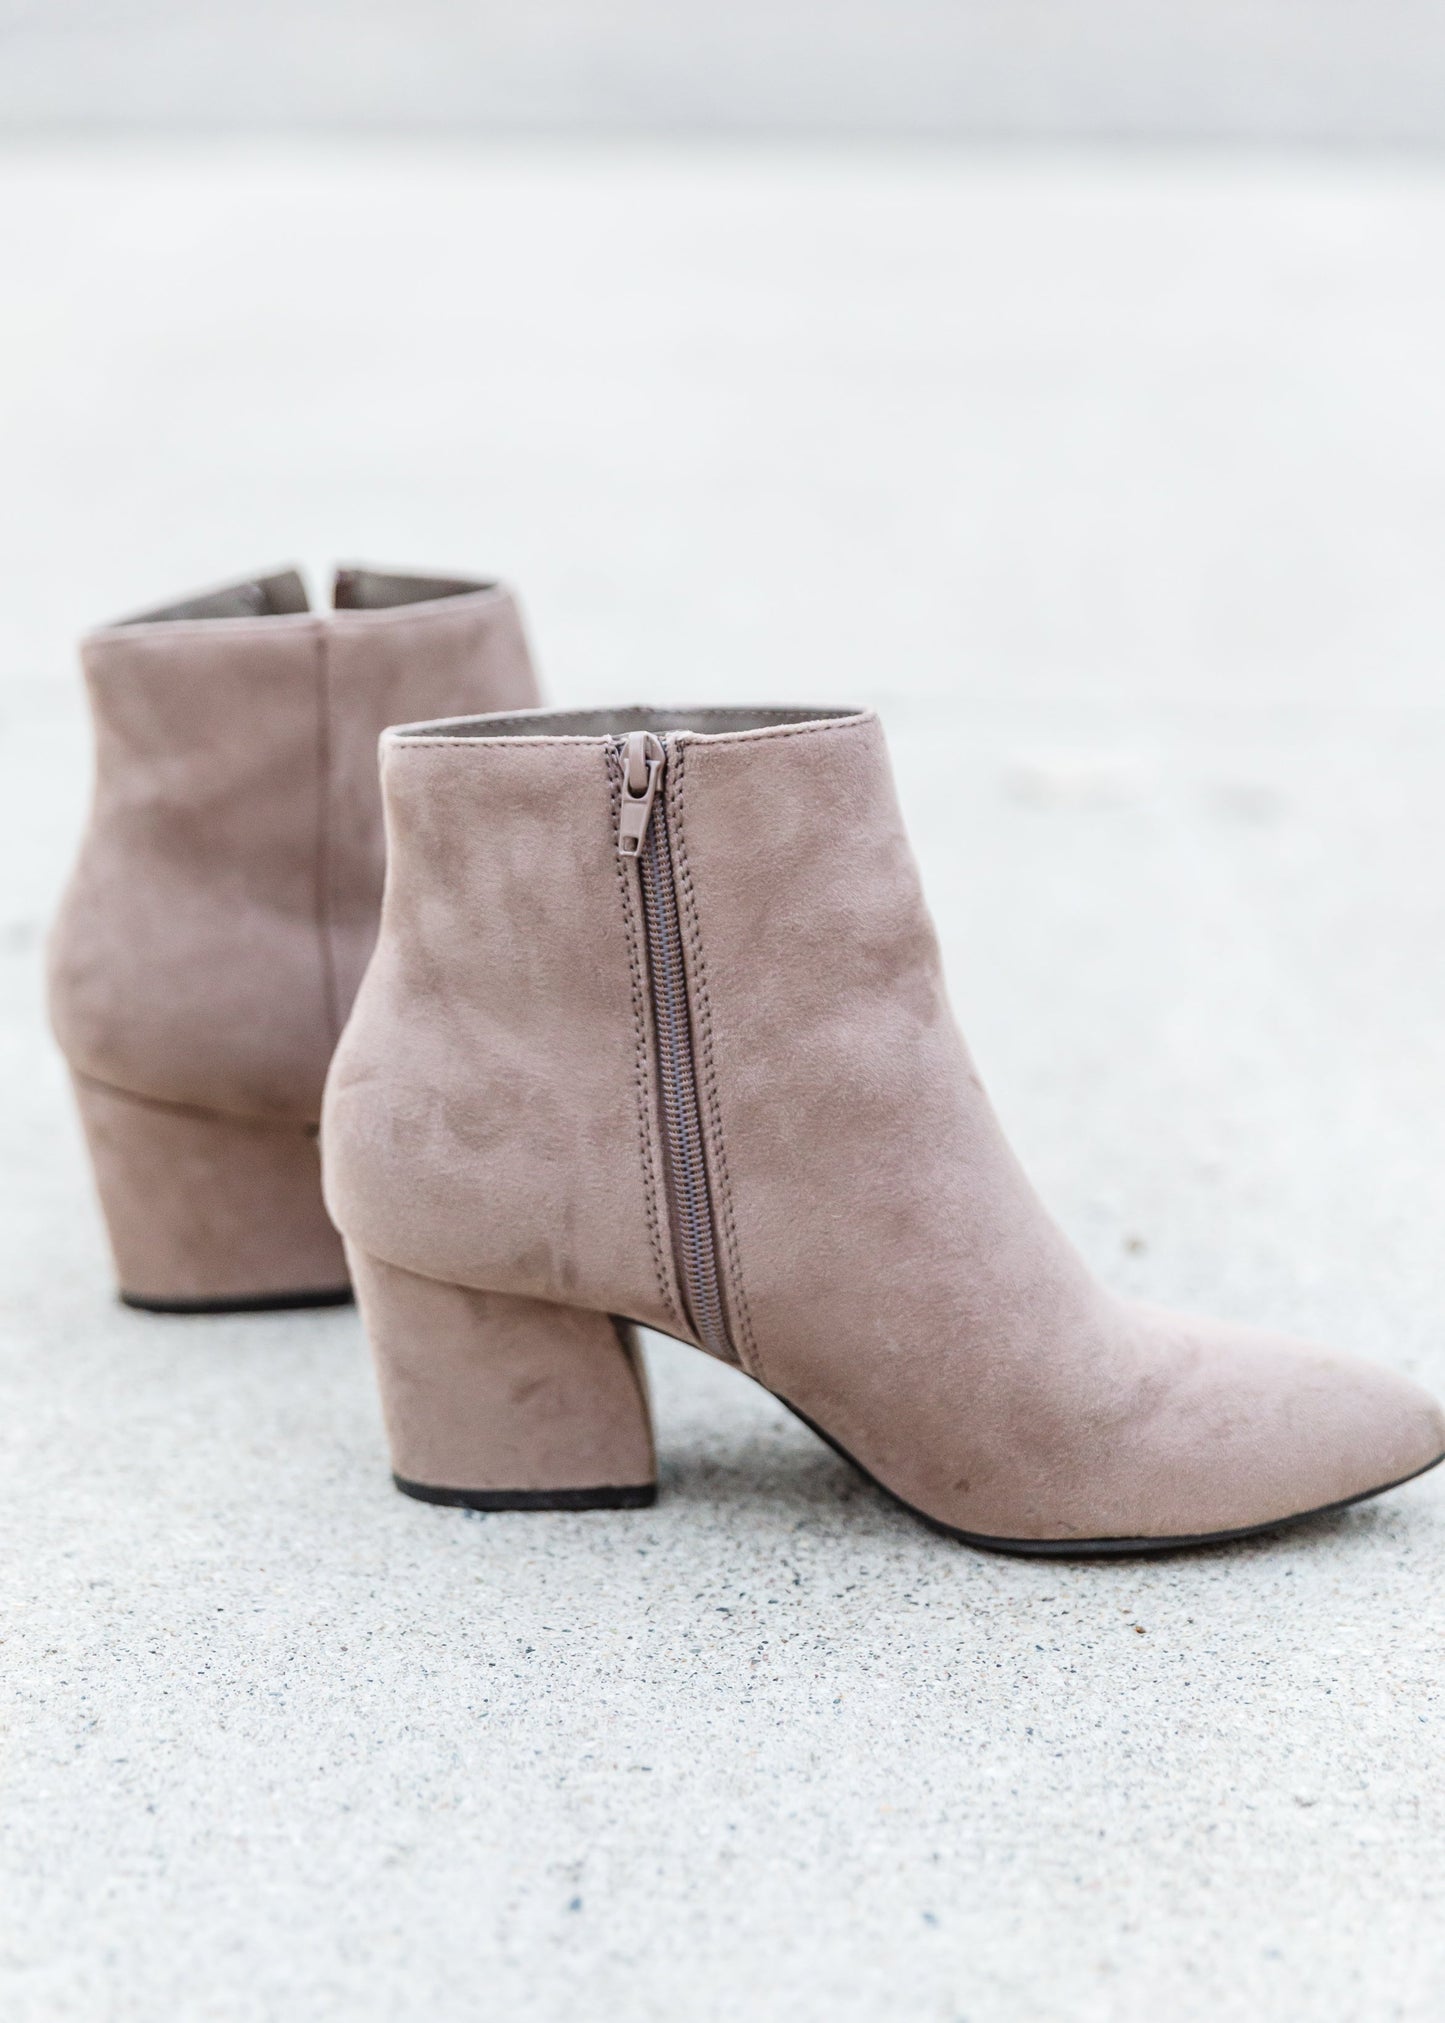 Taupe Pointed Toe Bootie - FINAL SALE Shoes